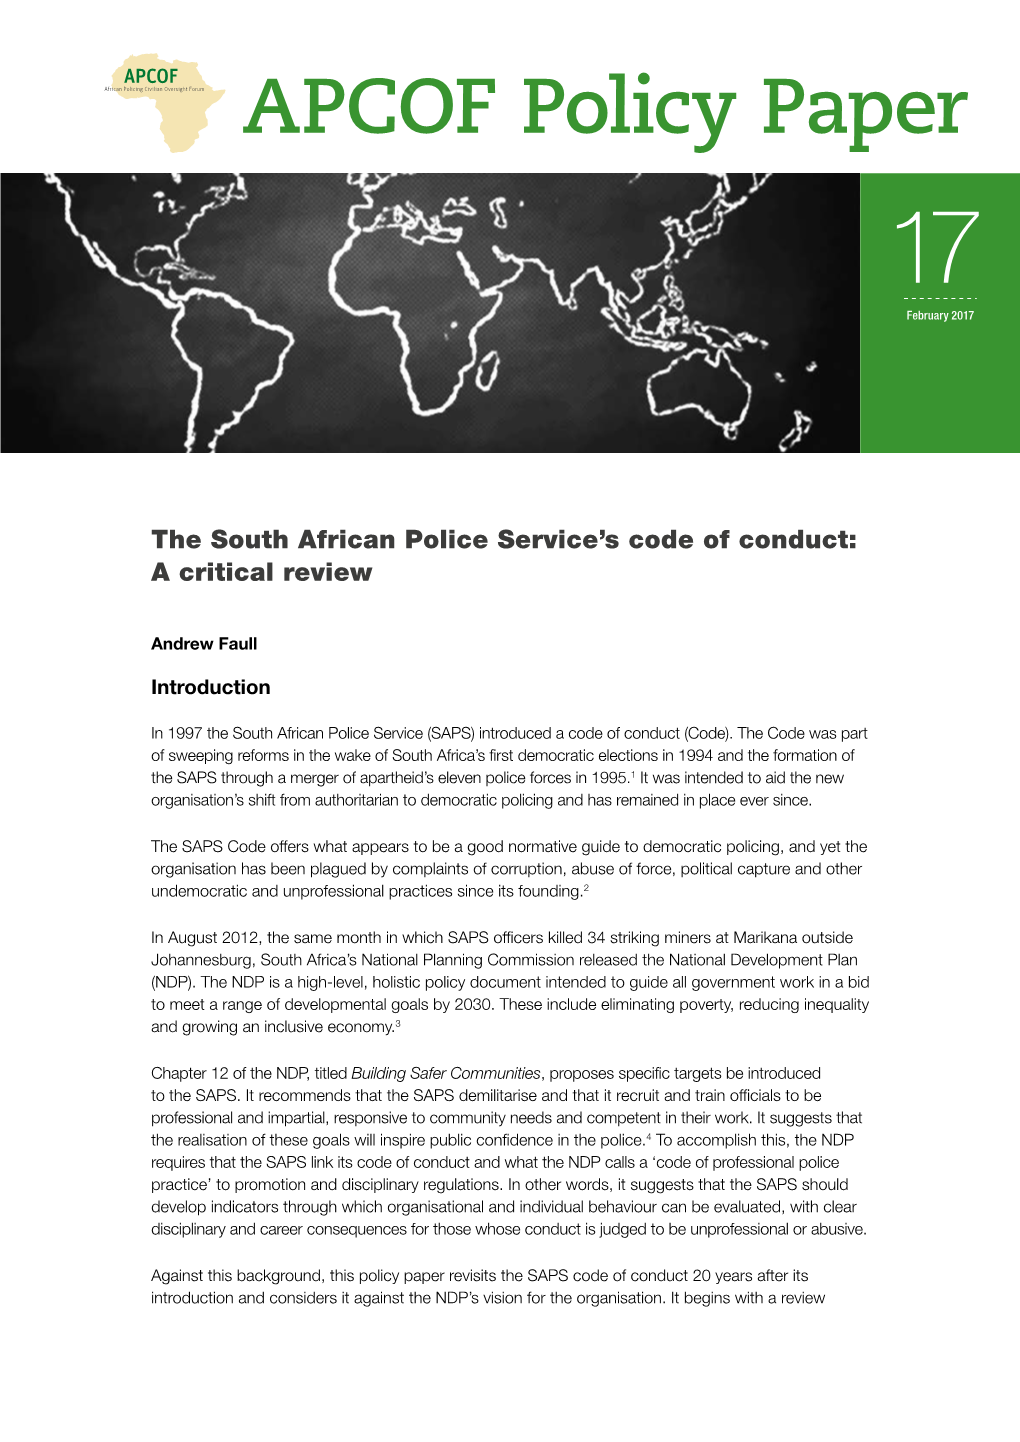 The South African Police Service's Code of Conduct